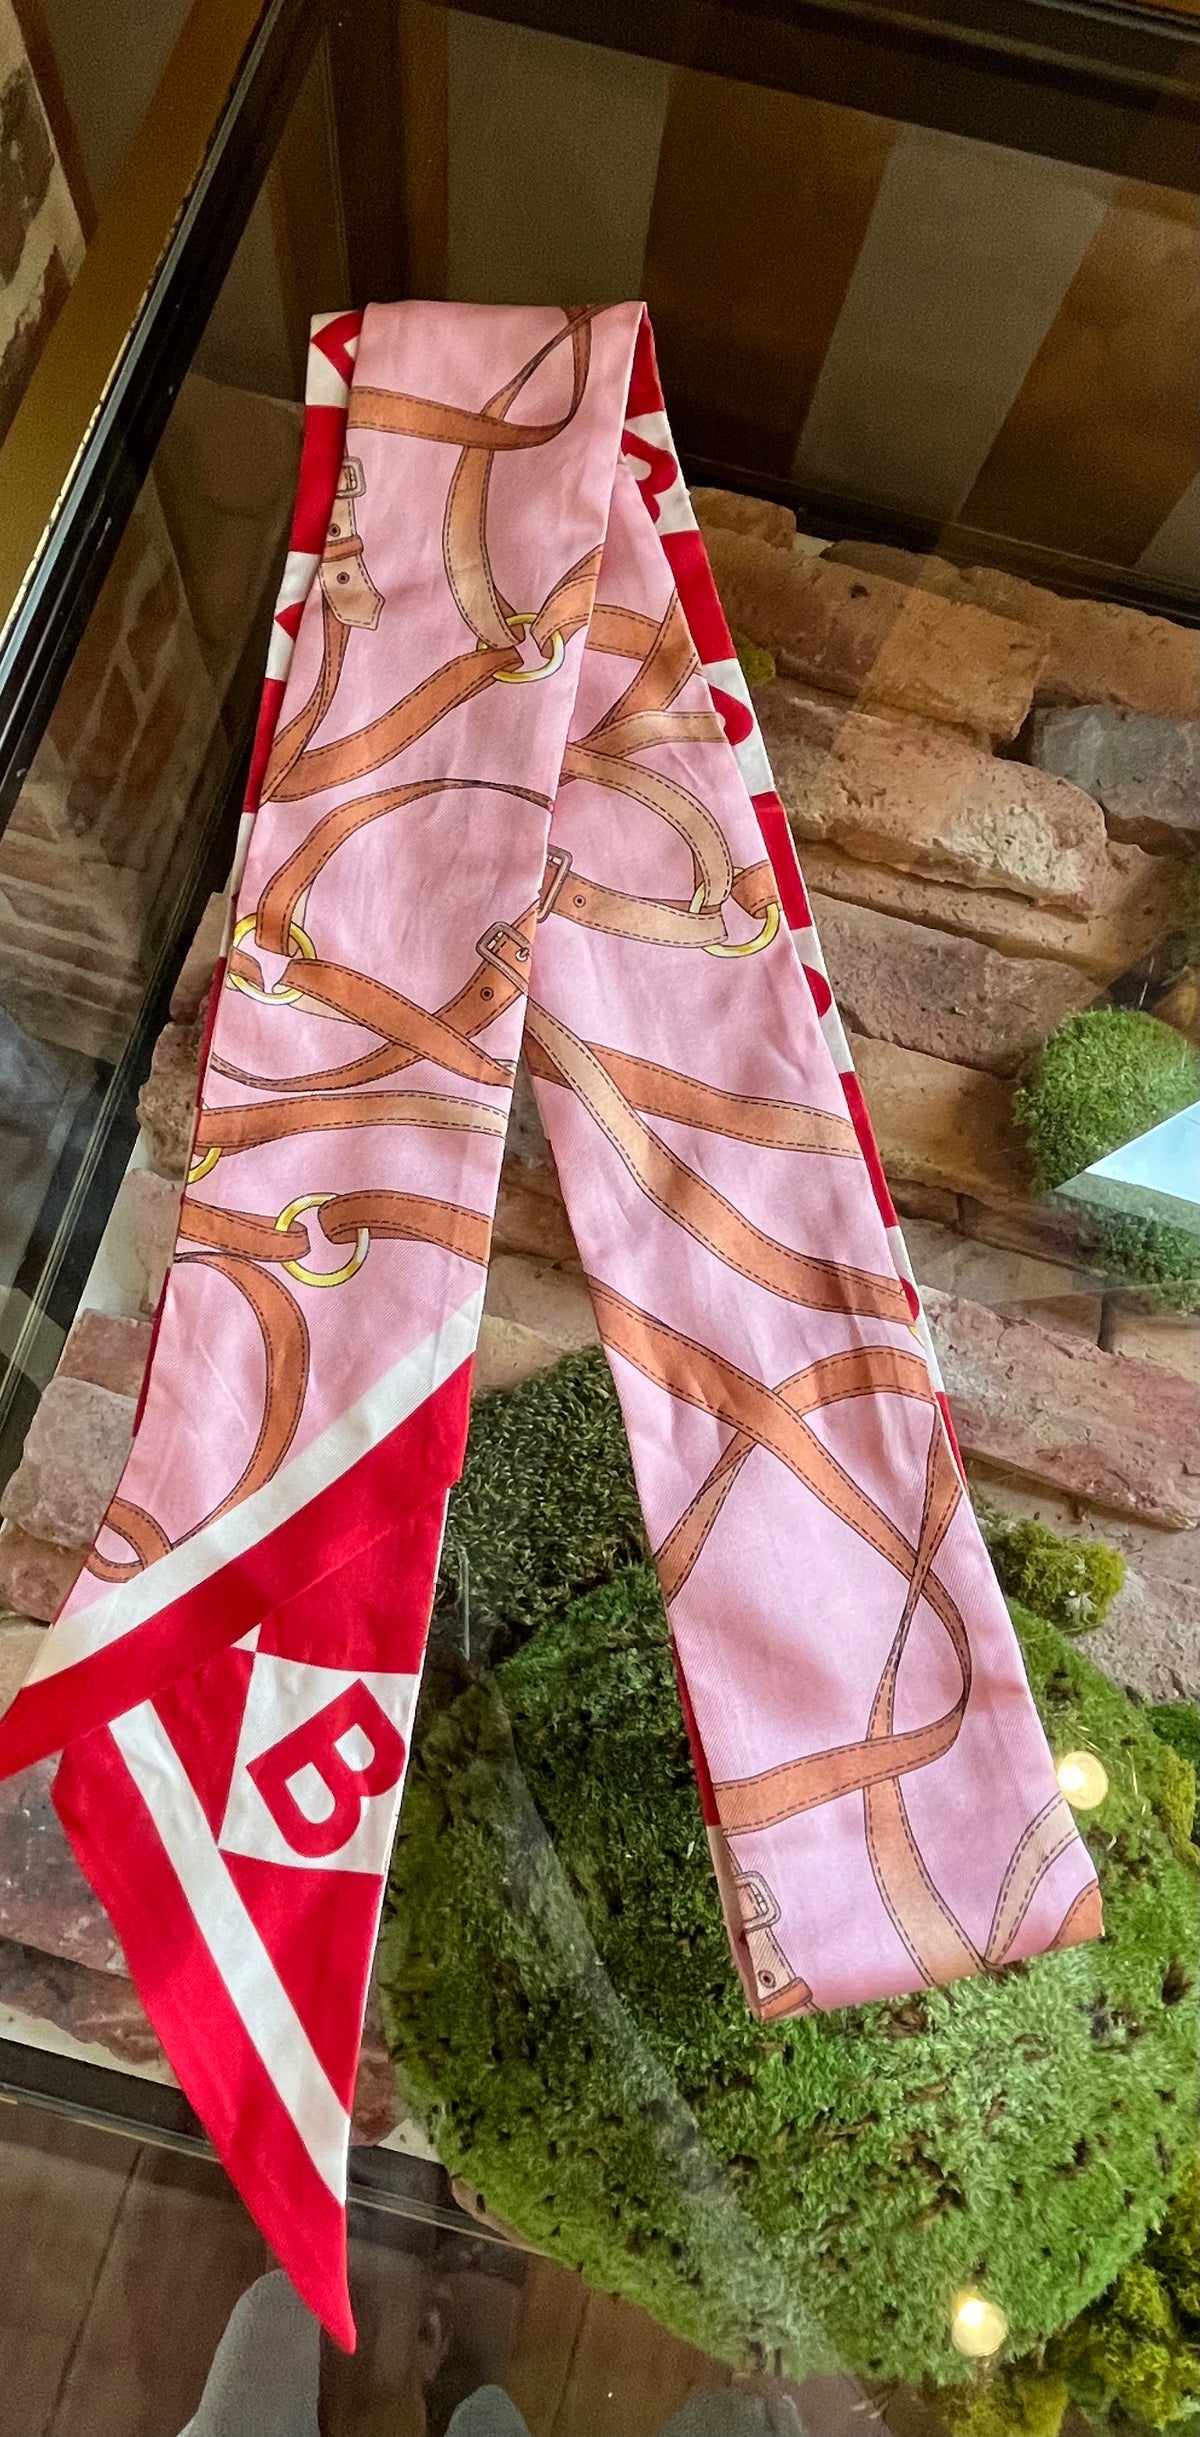 BURBERRY Pink/Red Twilly Scarf